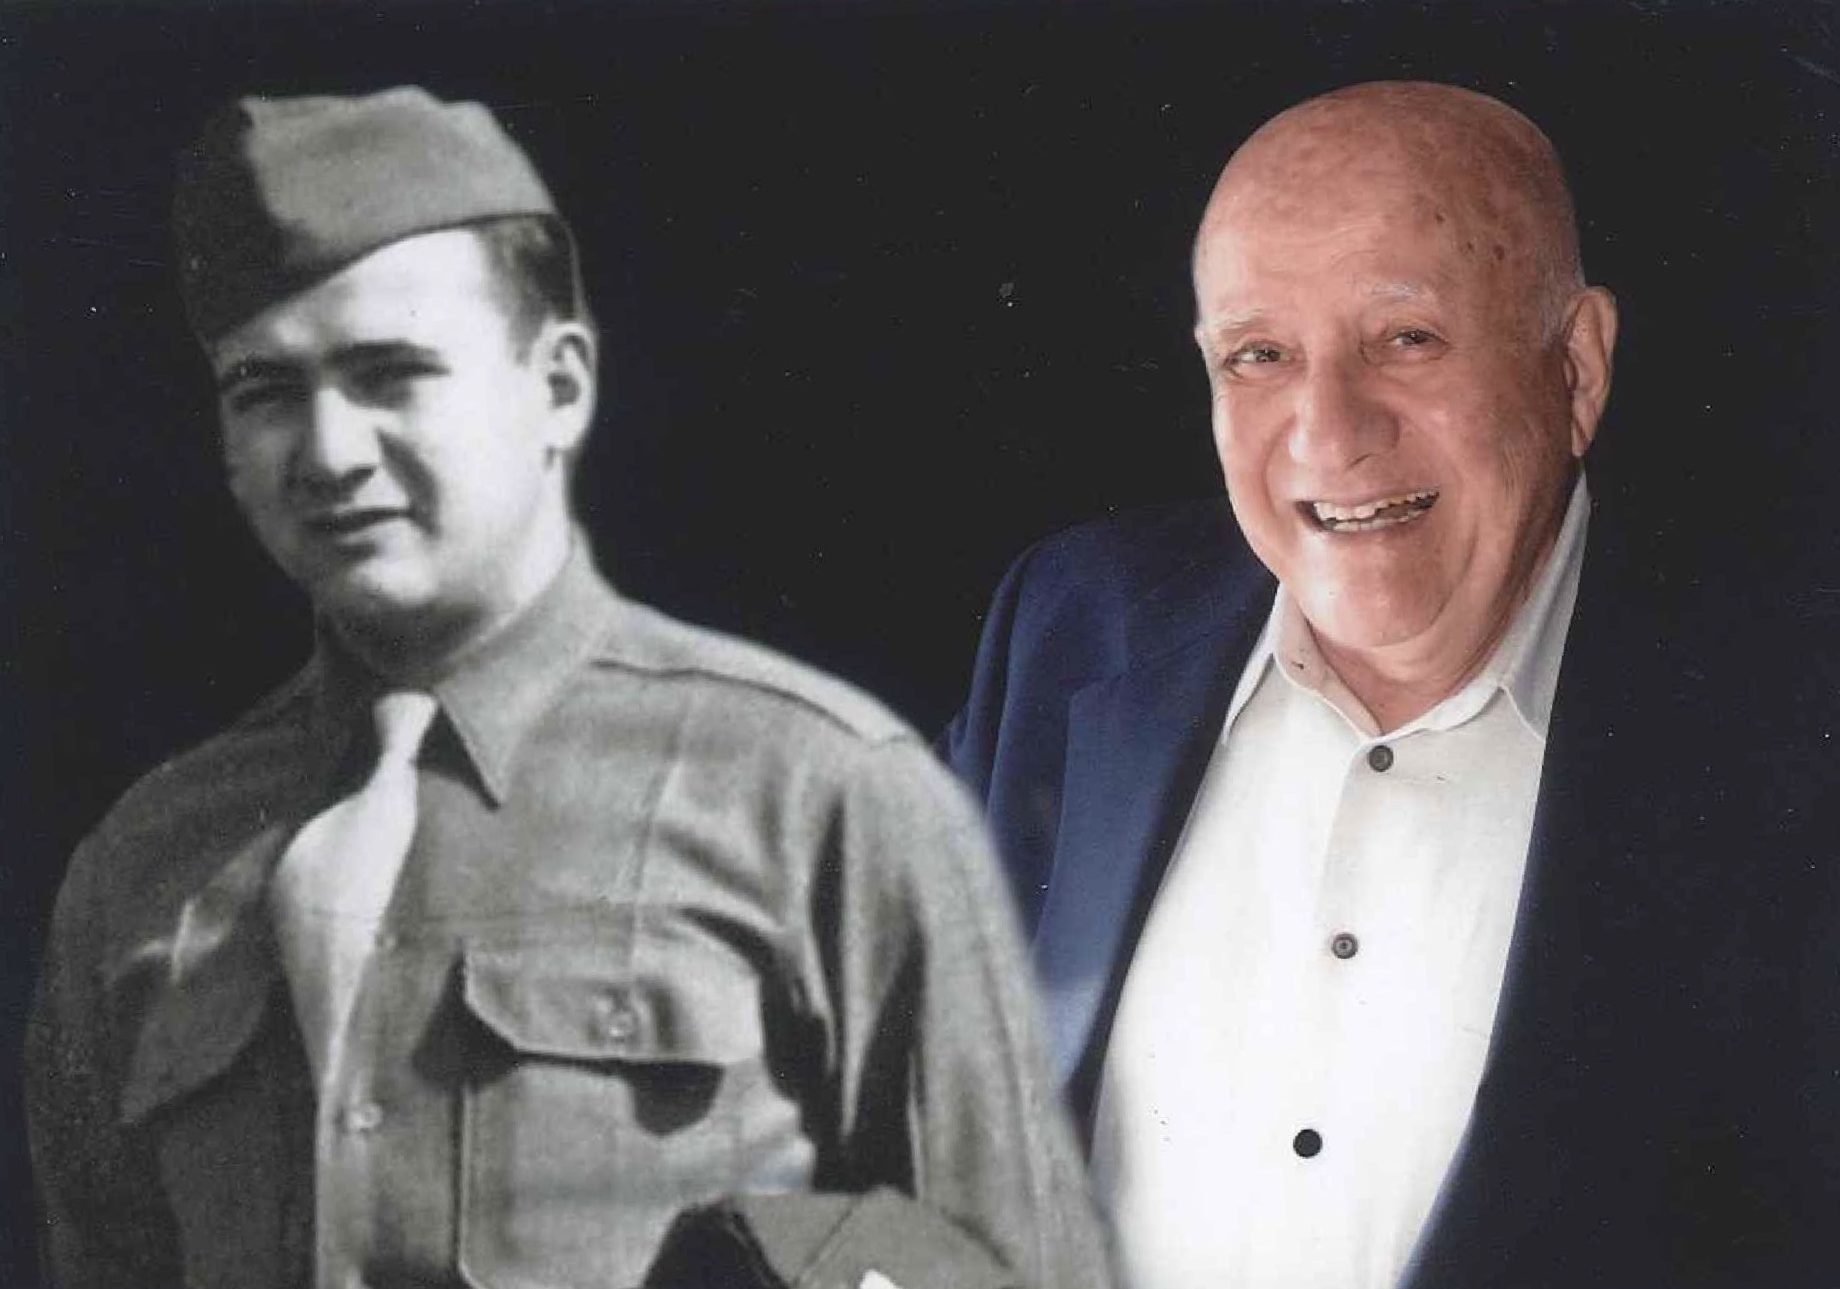 World War II veteran Mort Zimmerman, now 95, will be the Grand Marshal of the Great Neck memorial parade. (Photos courtesy of Zimmerman/Edelson)